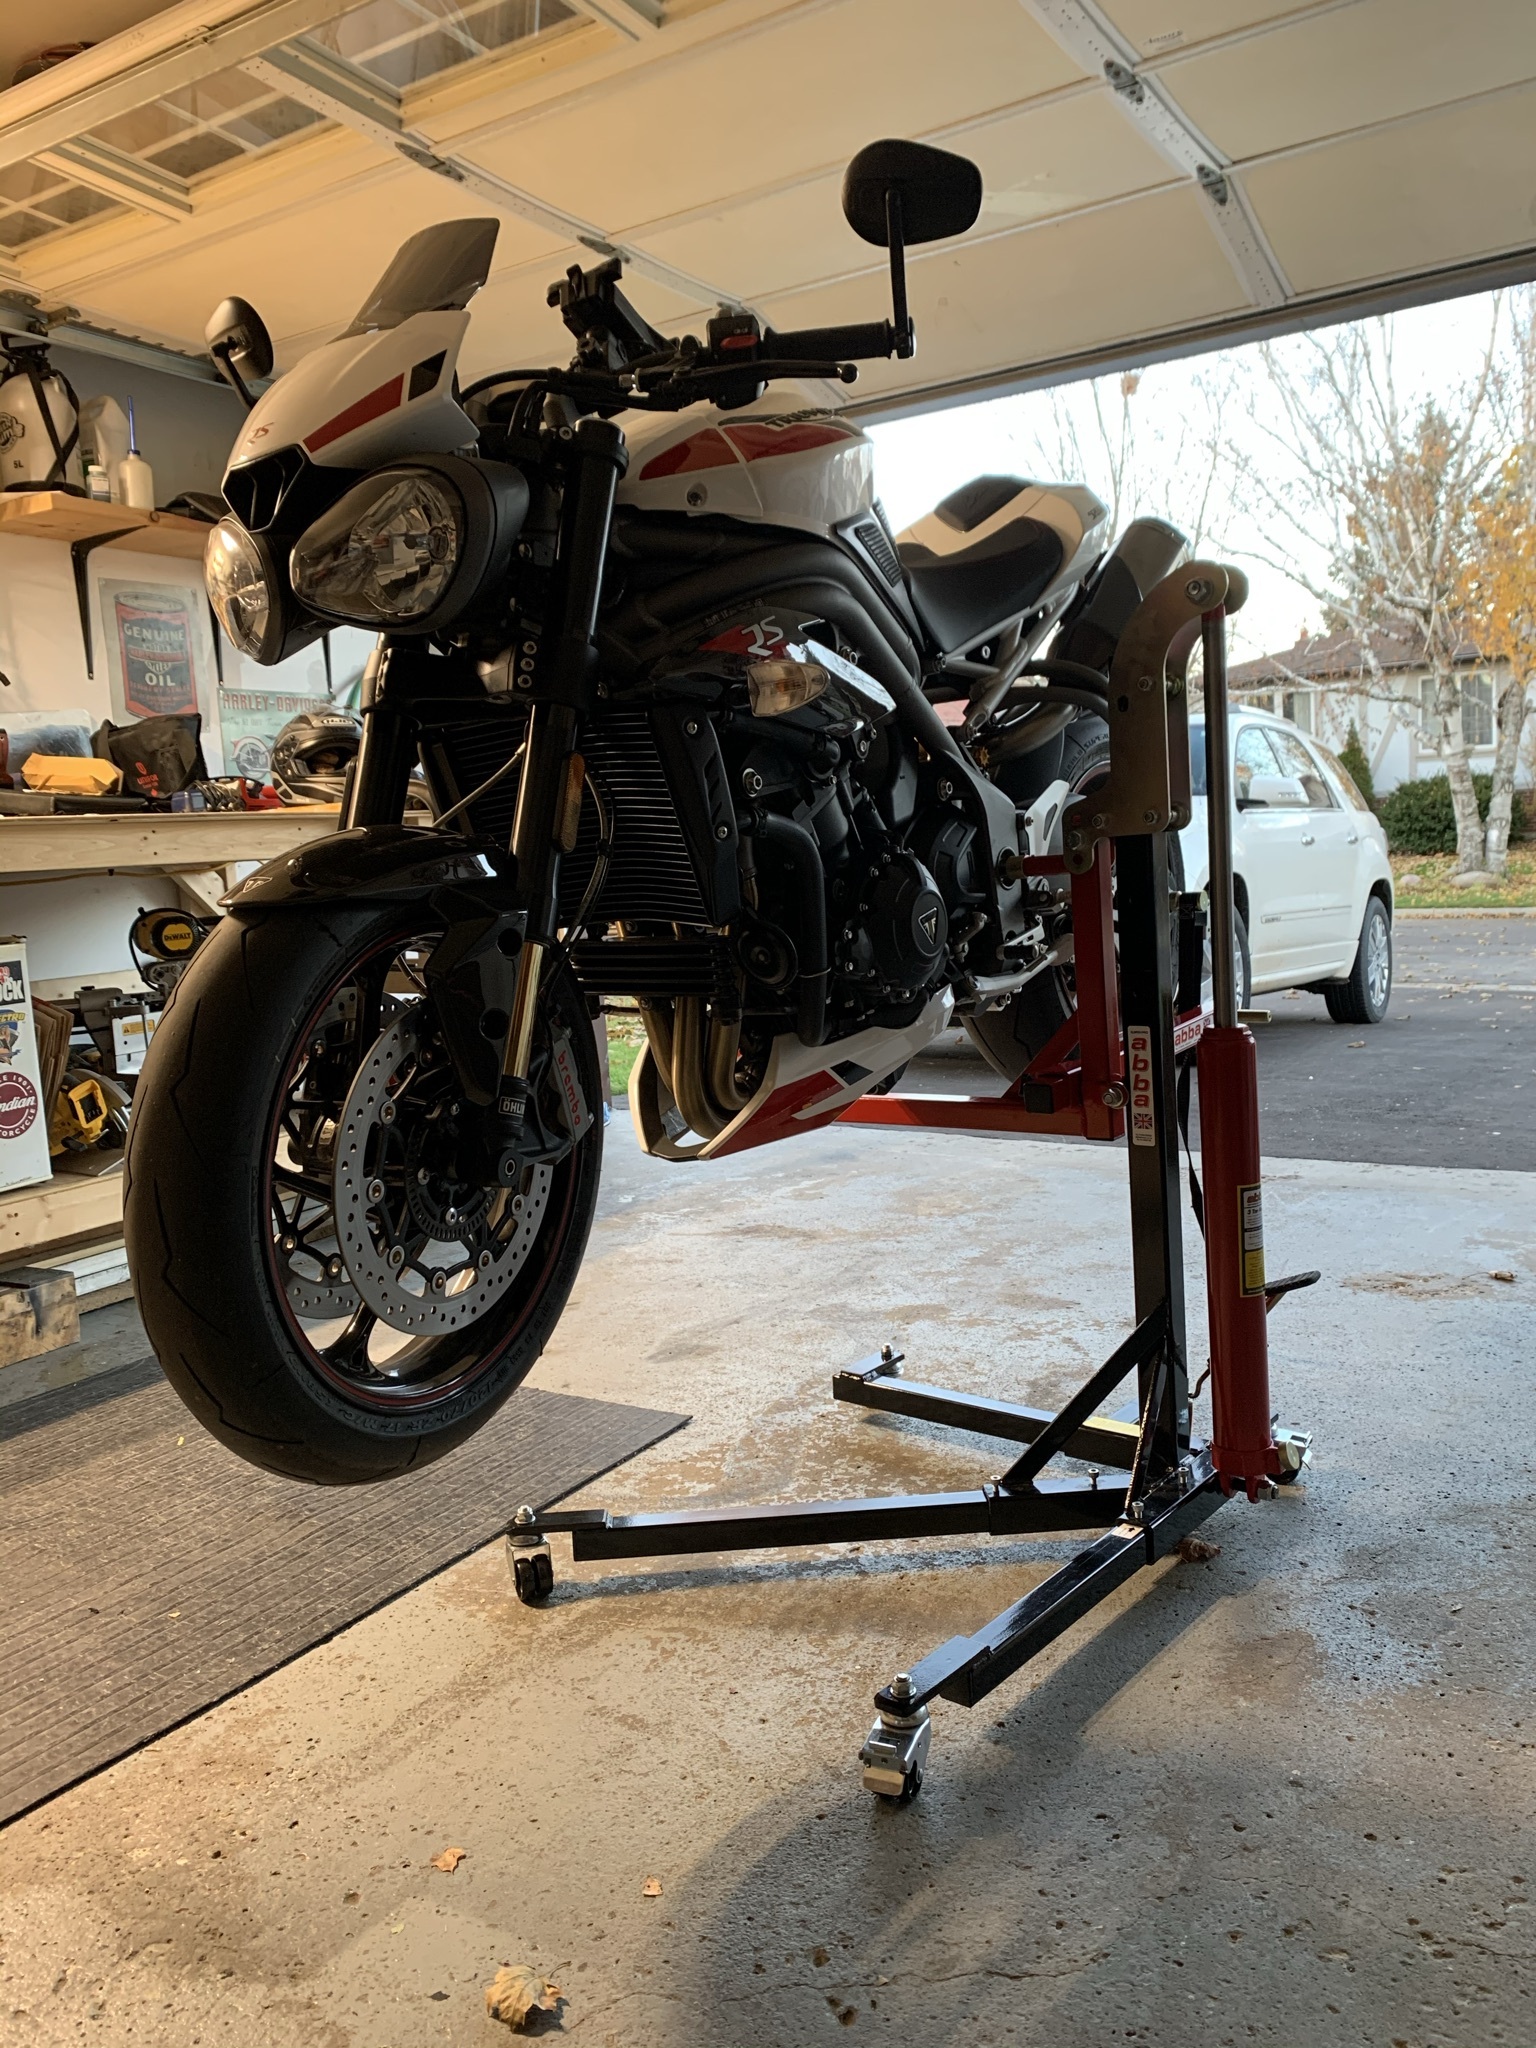 New Lift Stand For The Rs | The Triumph Forum